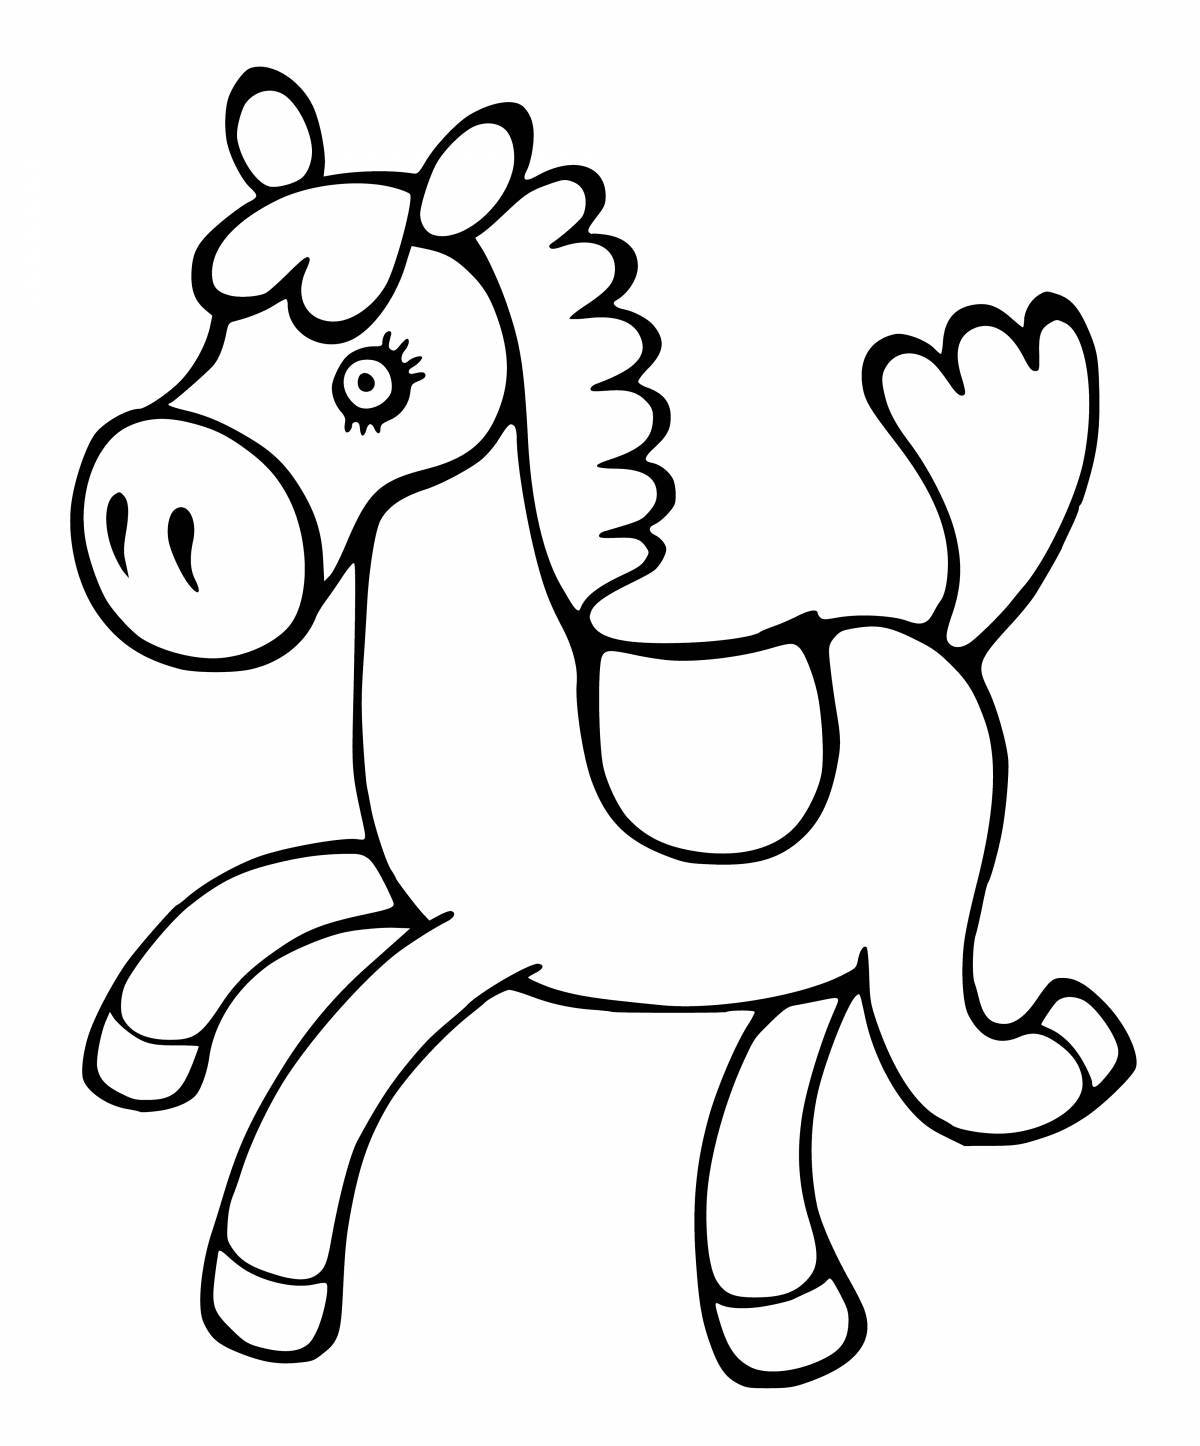 Coloring horse for a galloping foal for children